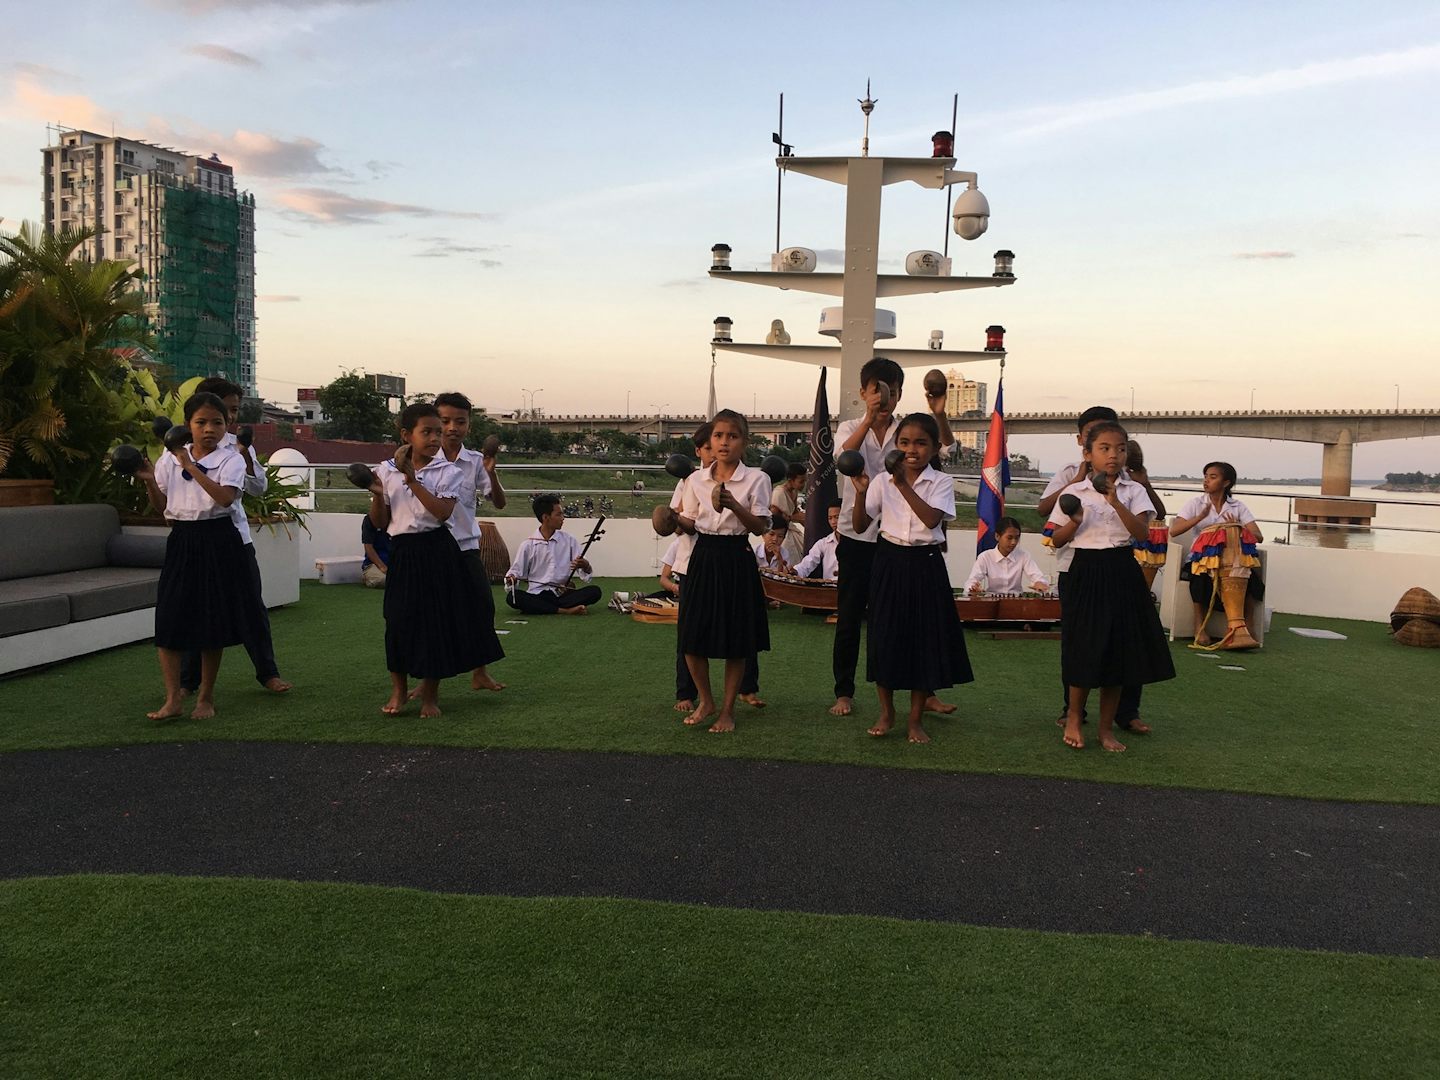 Local school children showing us their cultural dance and music.